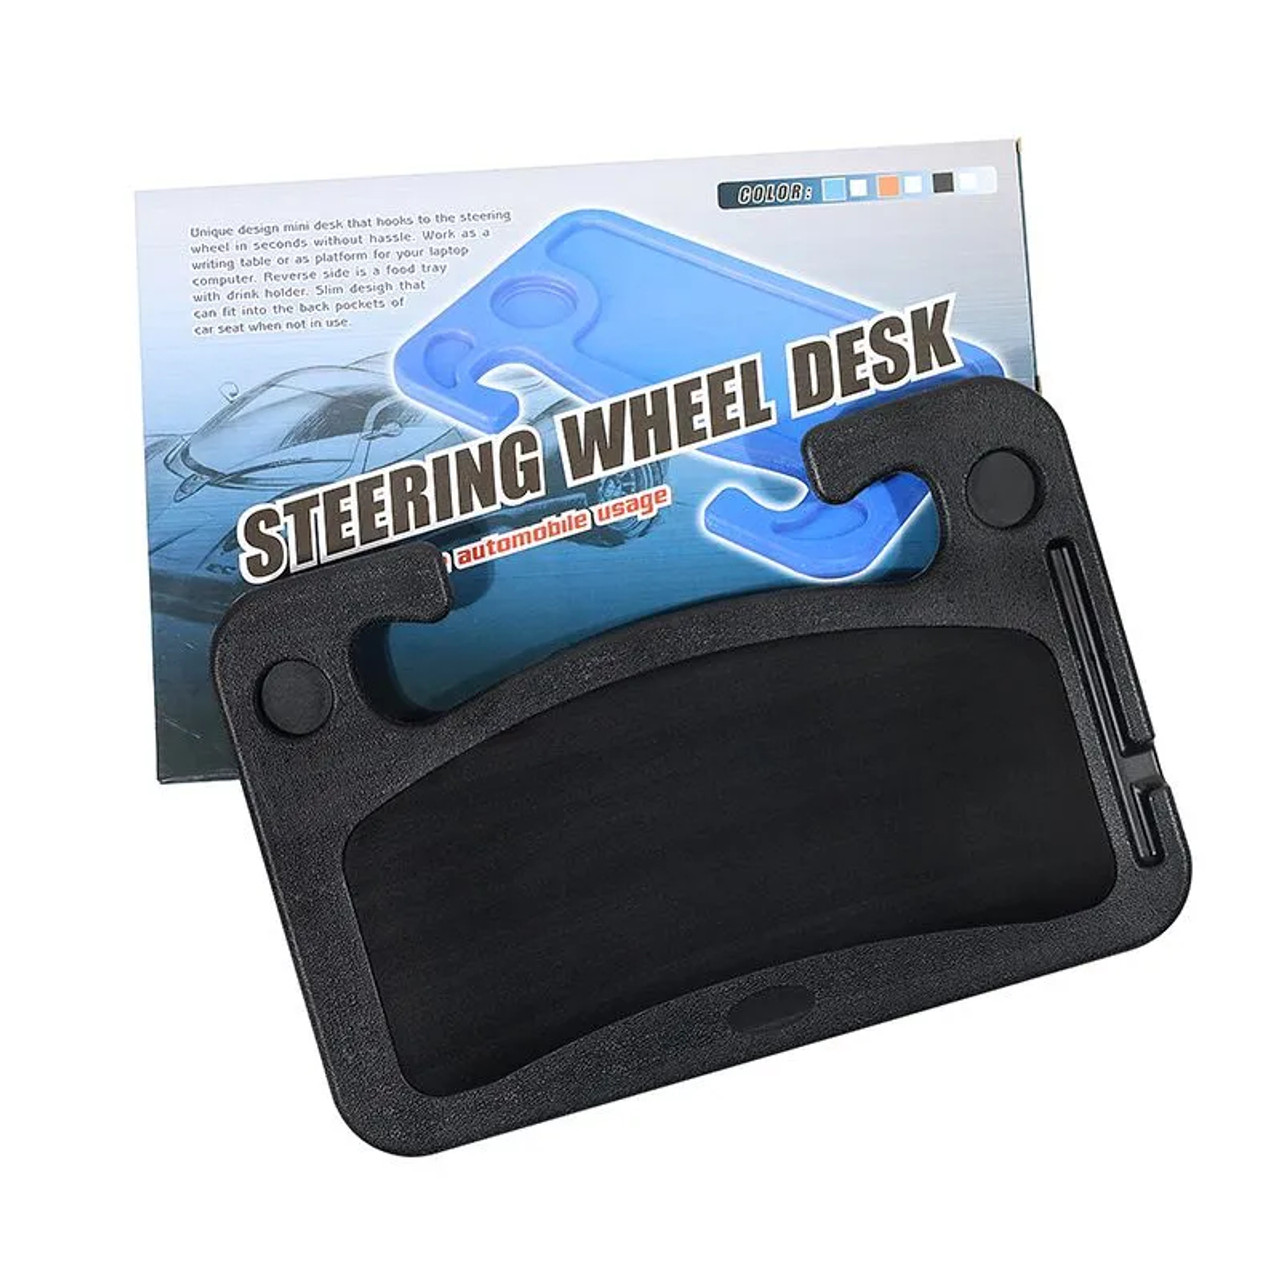 Car Steering Wheel Tray Desk Two Sided For Laptop Drink Food Work